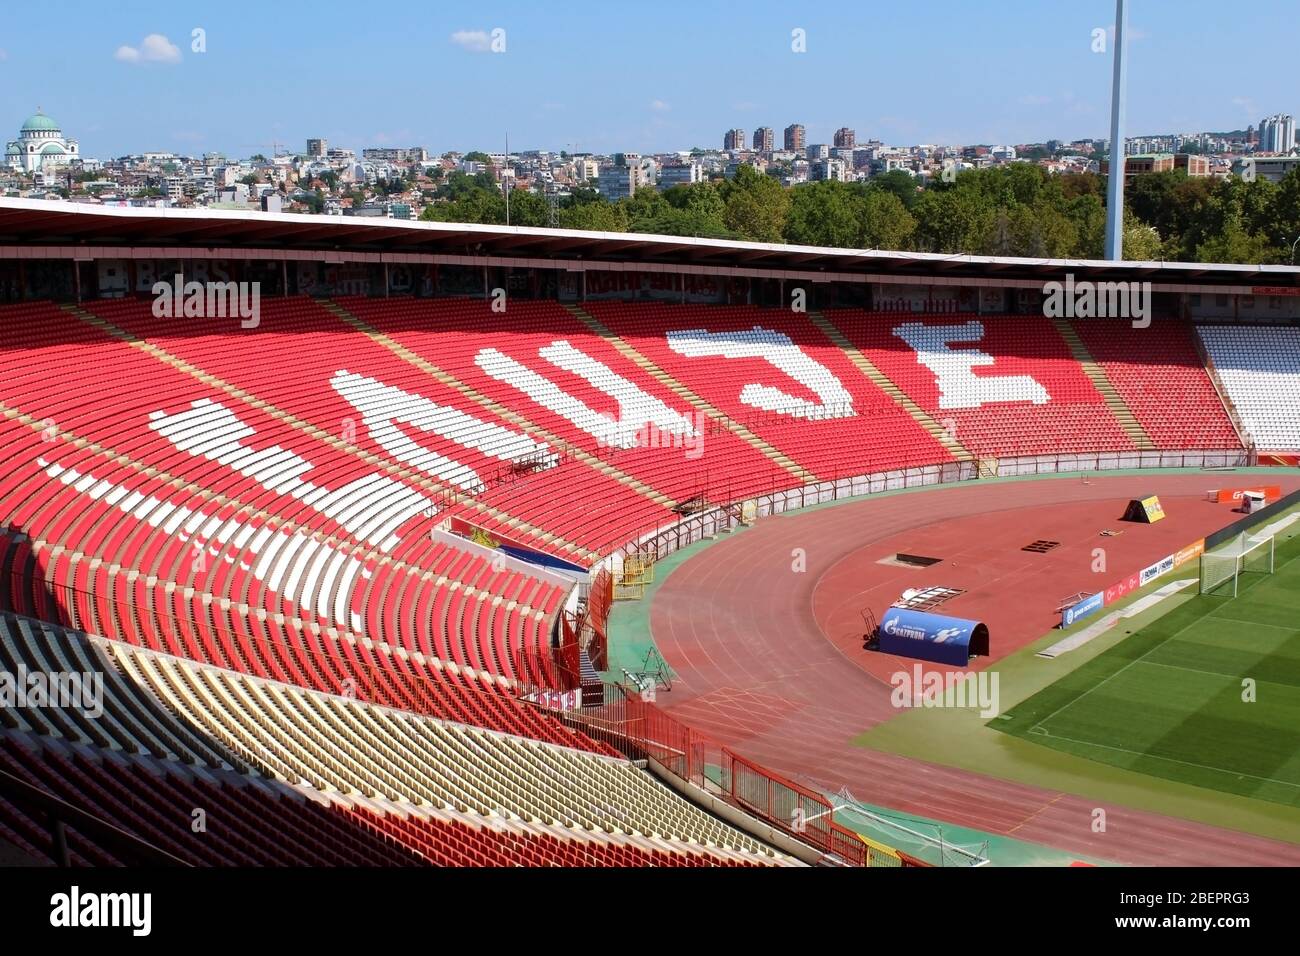 BELGRADE, SERBIA - AUGUST 2019: Red Star stadium Delije sector and city skyline in the background Stock Photo